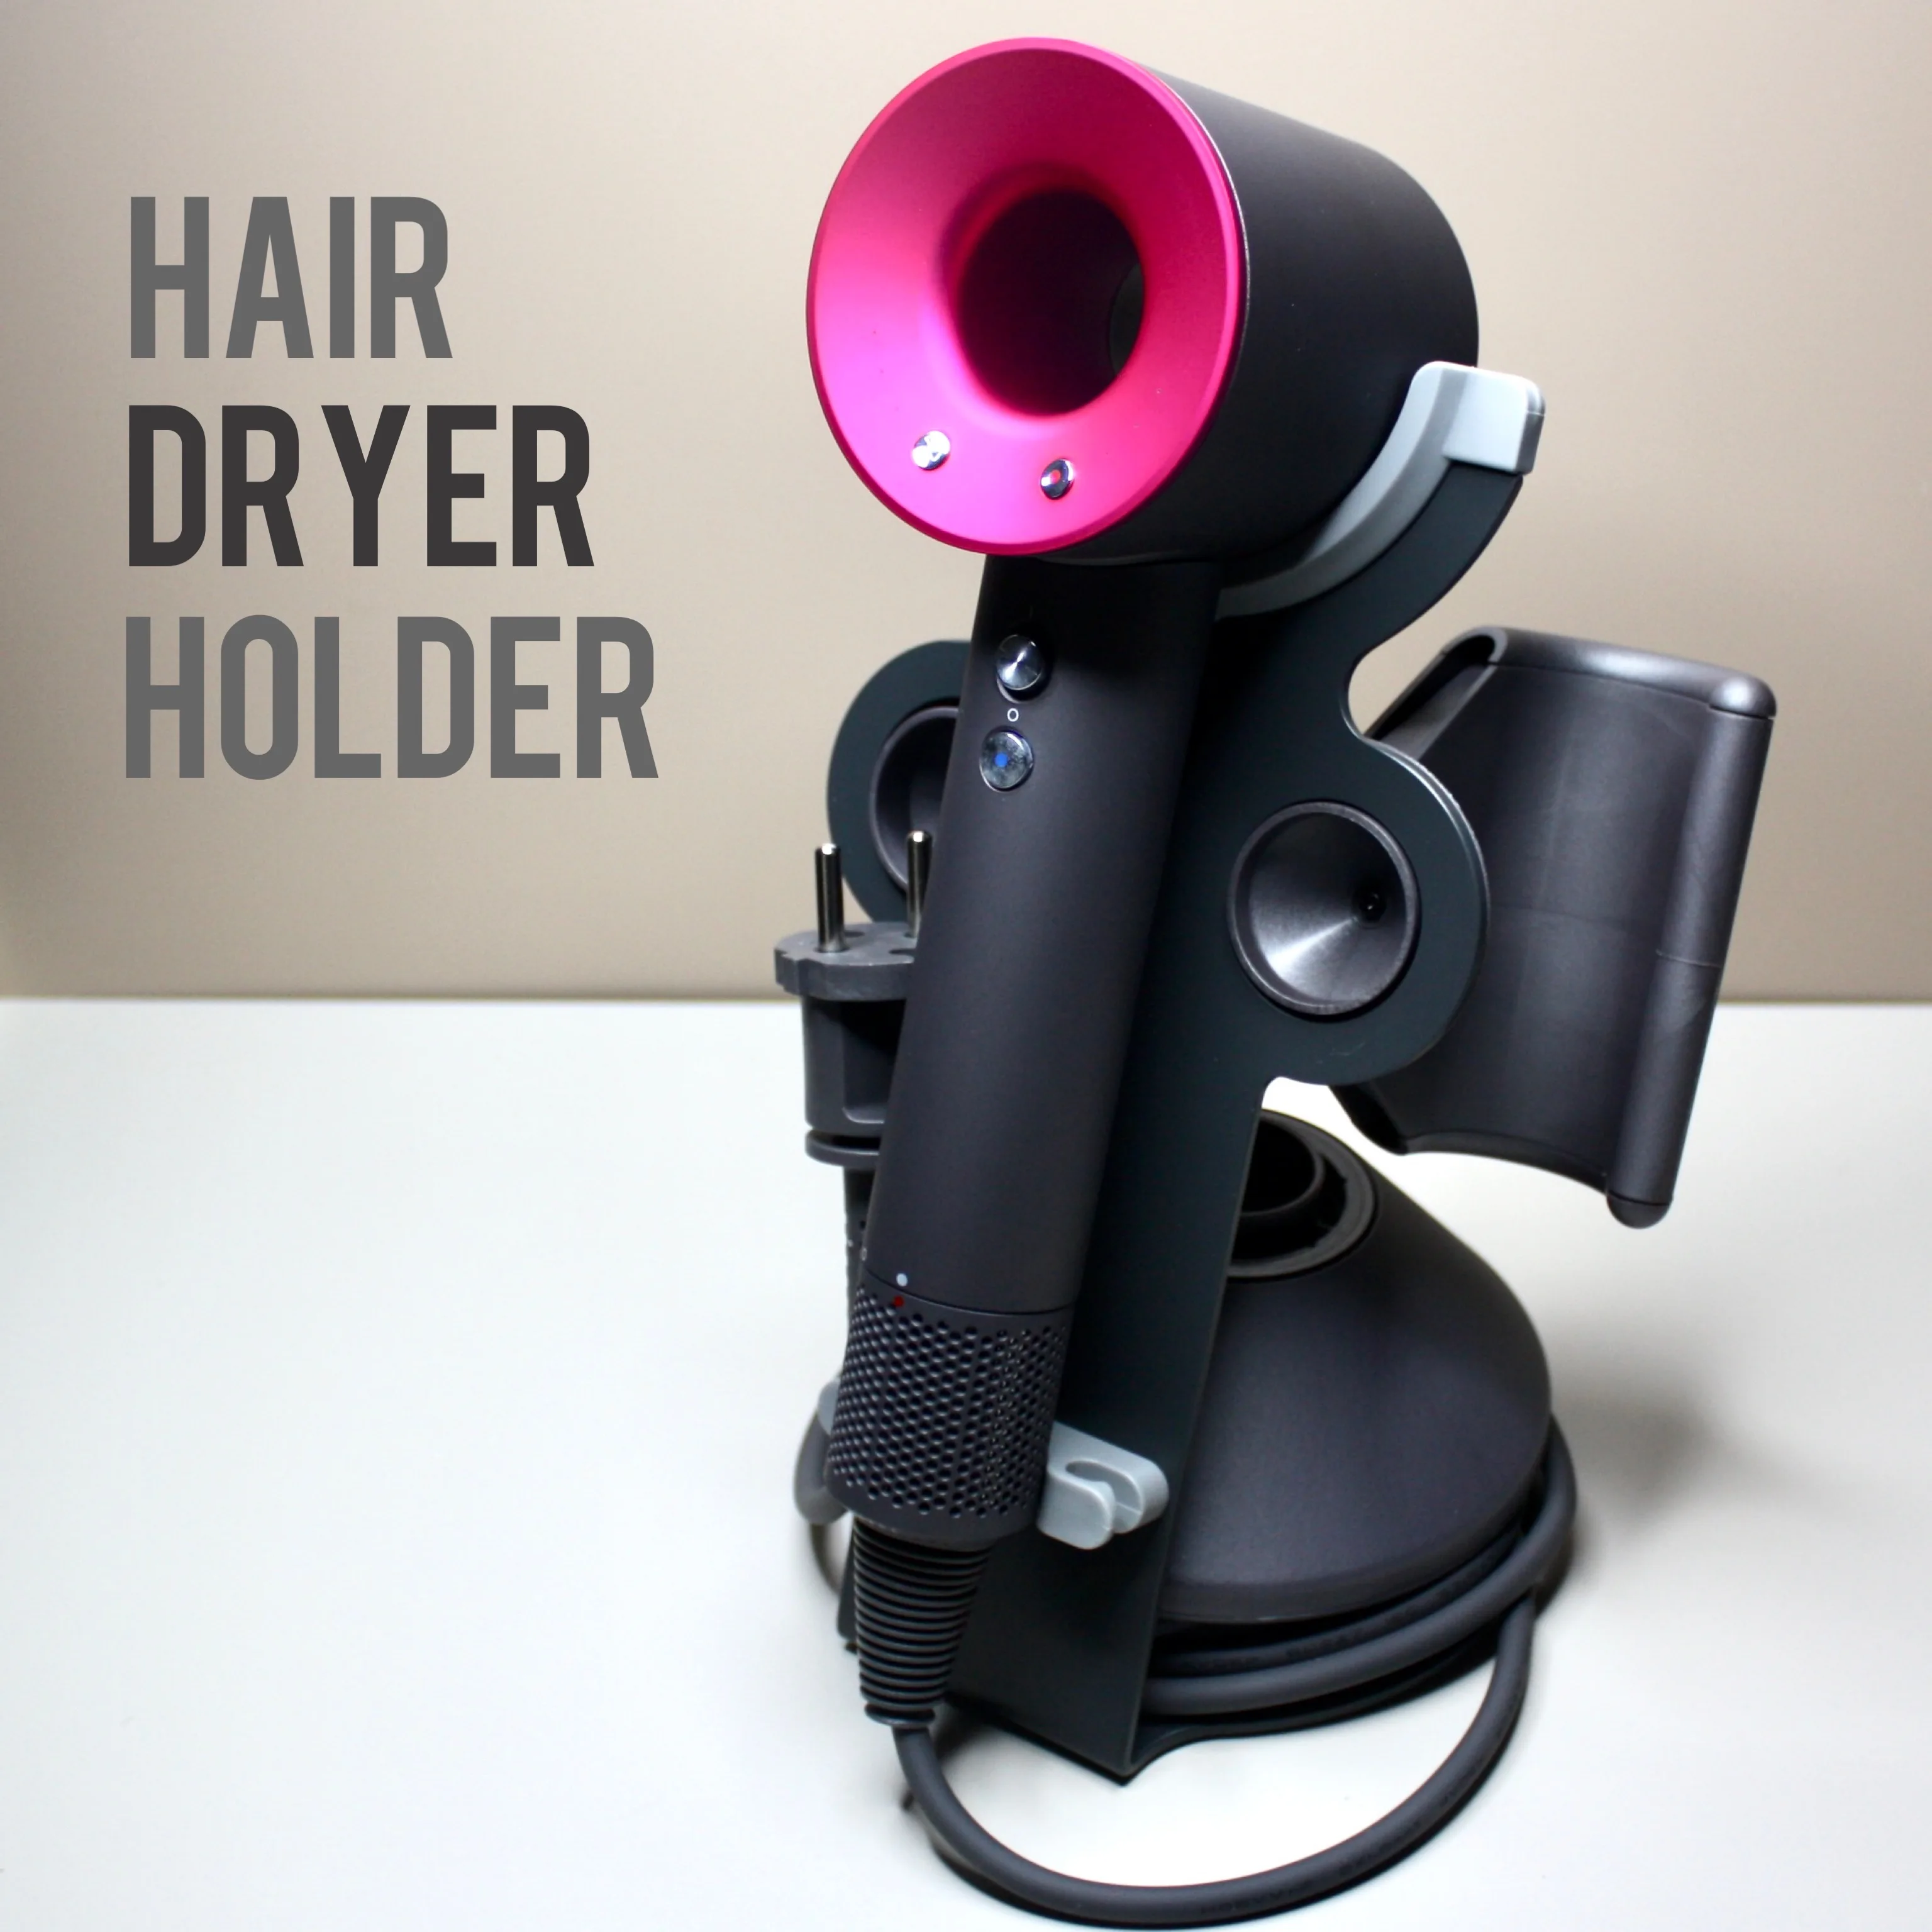 Stand Holder Bracket For Dyson Supersonic Hairdryer Aluminum Magnetic Nozzles Storage Rack For Dyson Hairdryer Stand Holder